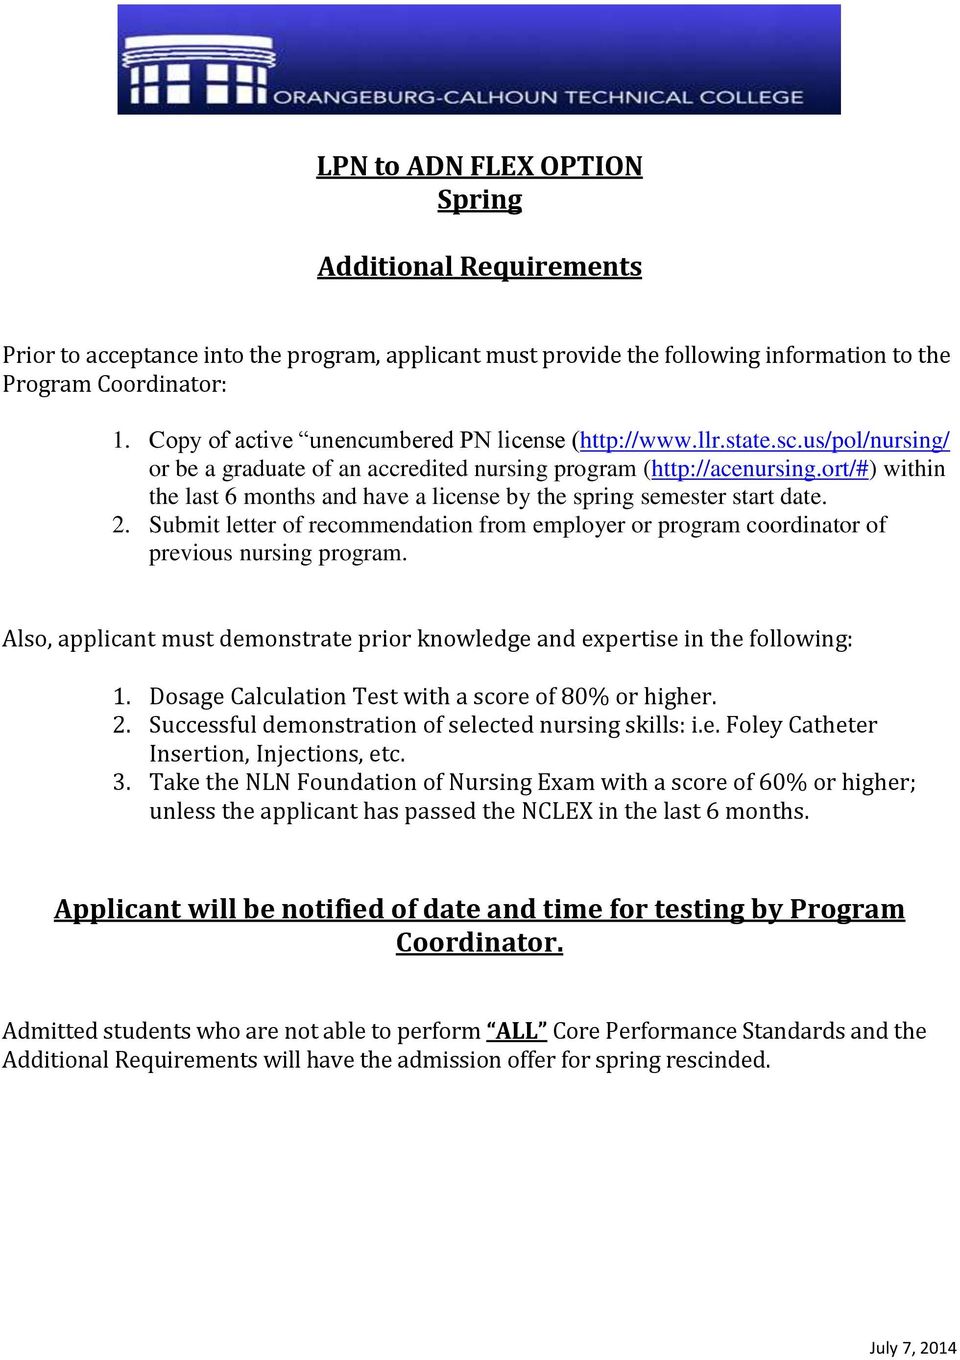 ort/#) within the last 6 months and have a license by the spring semester start date. 2. Submit letter of recommendation from employer or program coordinator of previous nursing program.